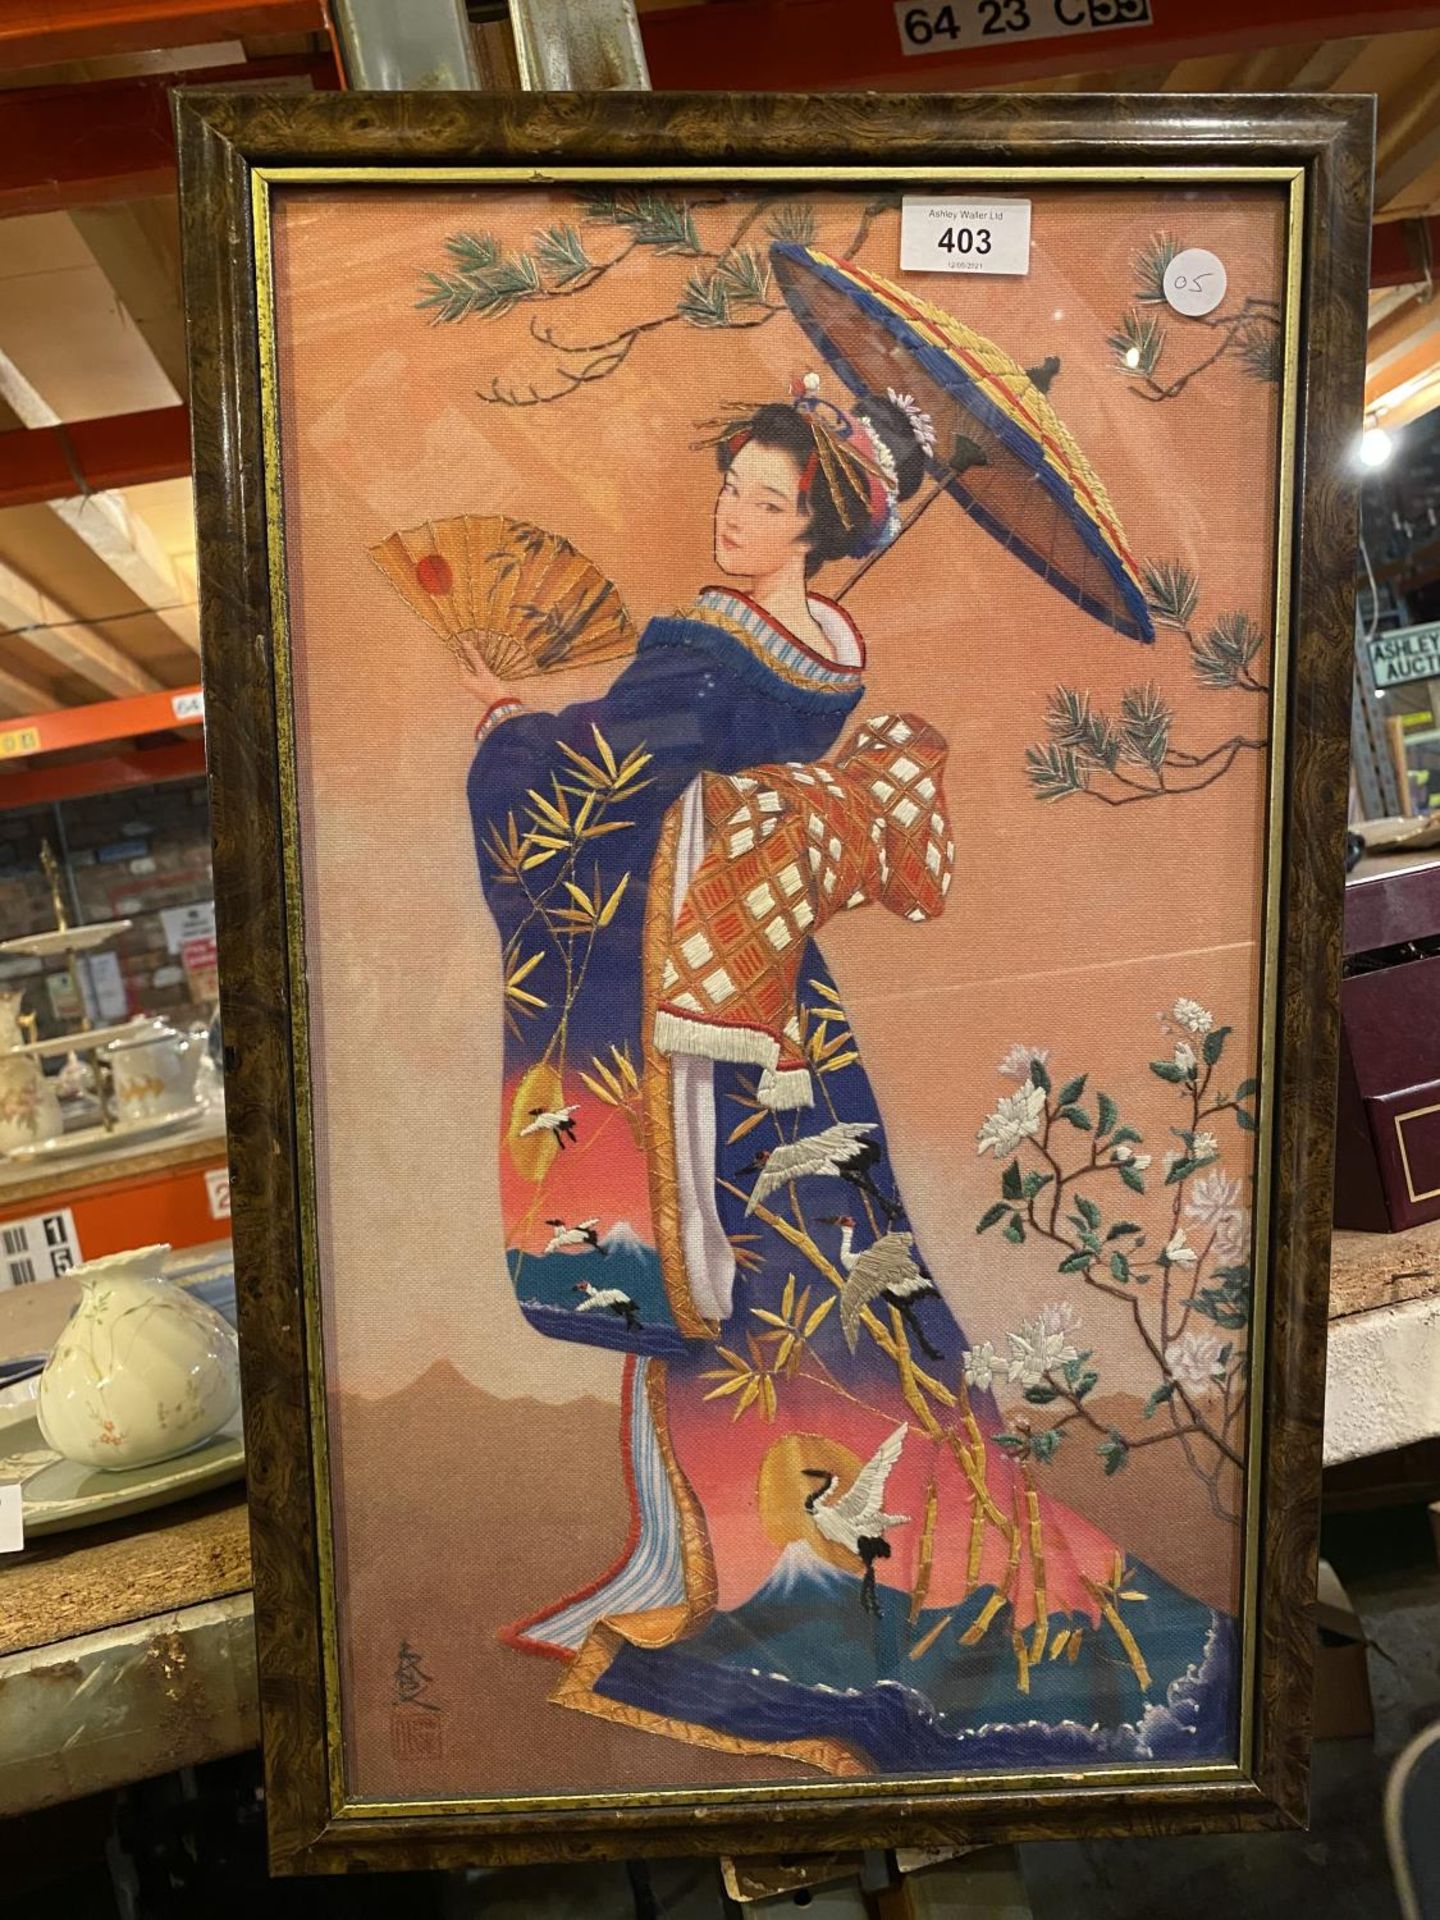 A FRAMED EMBRIODERED PICTURE OF A GEISHA GIRL SIGNED